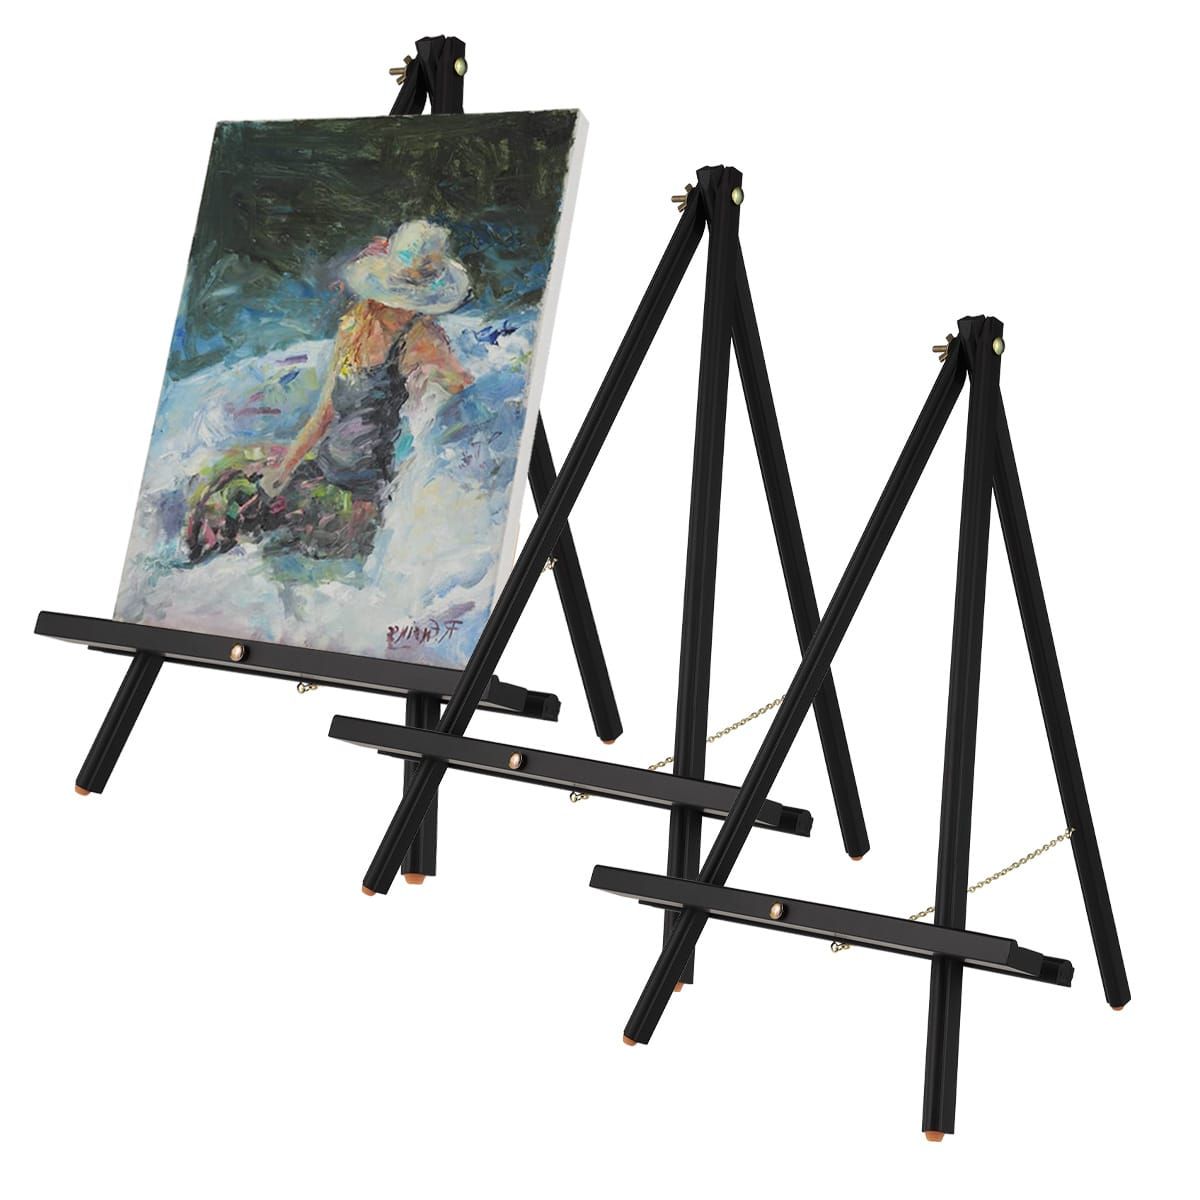  2 Pack 4 inch Decorative Plate Stands holder for display -  Black Metal Picture Stands for Display on Table Top -Trendy & Sturdy  Picture Frame Stand for Art Plate, Tablets -Book